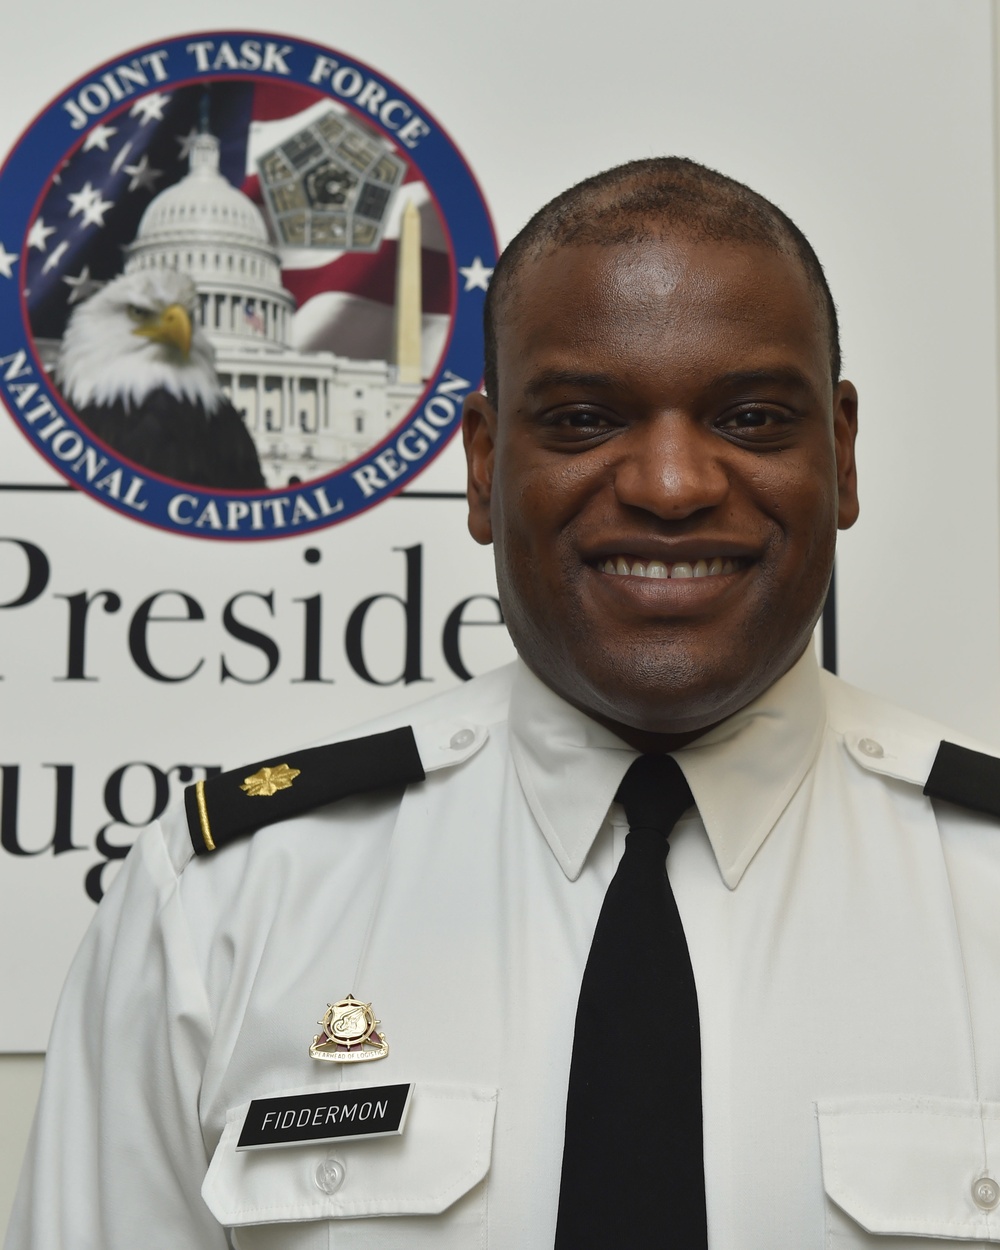 Army Major Fiddermon supports the 58th Presidential Inauguration